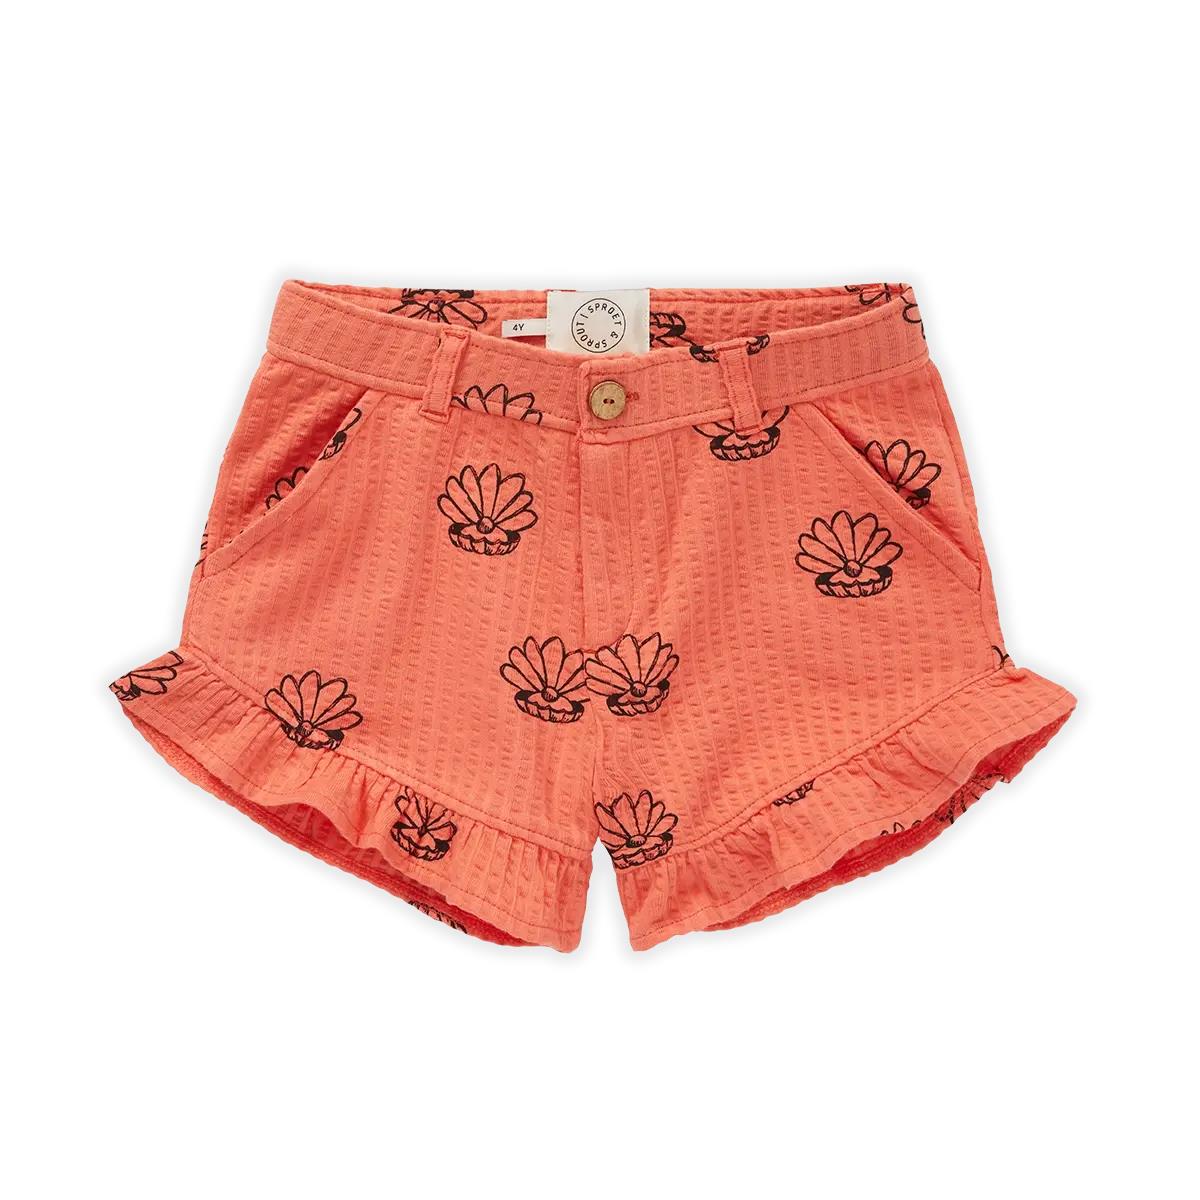 SPROET & SPROUT - Ruffle short Shell print